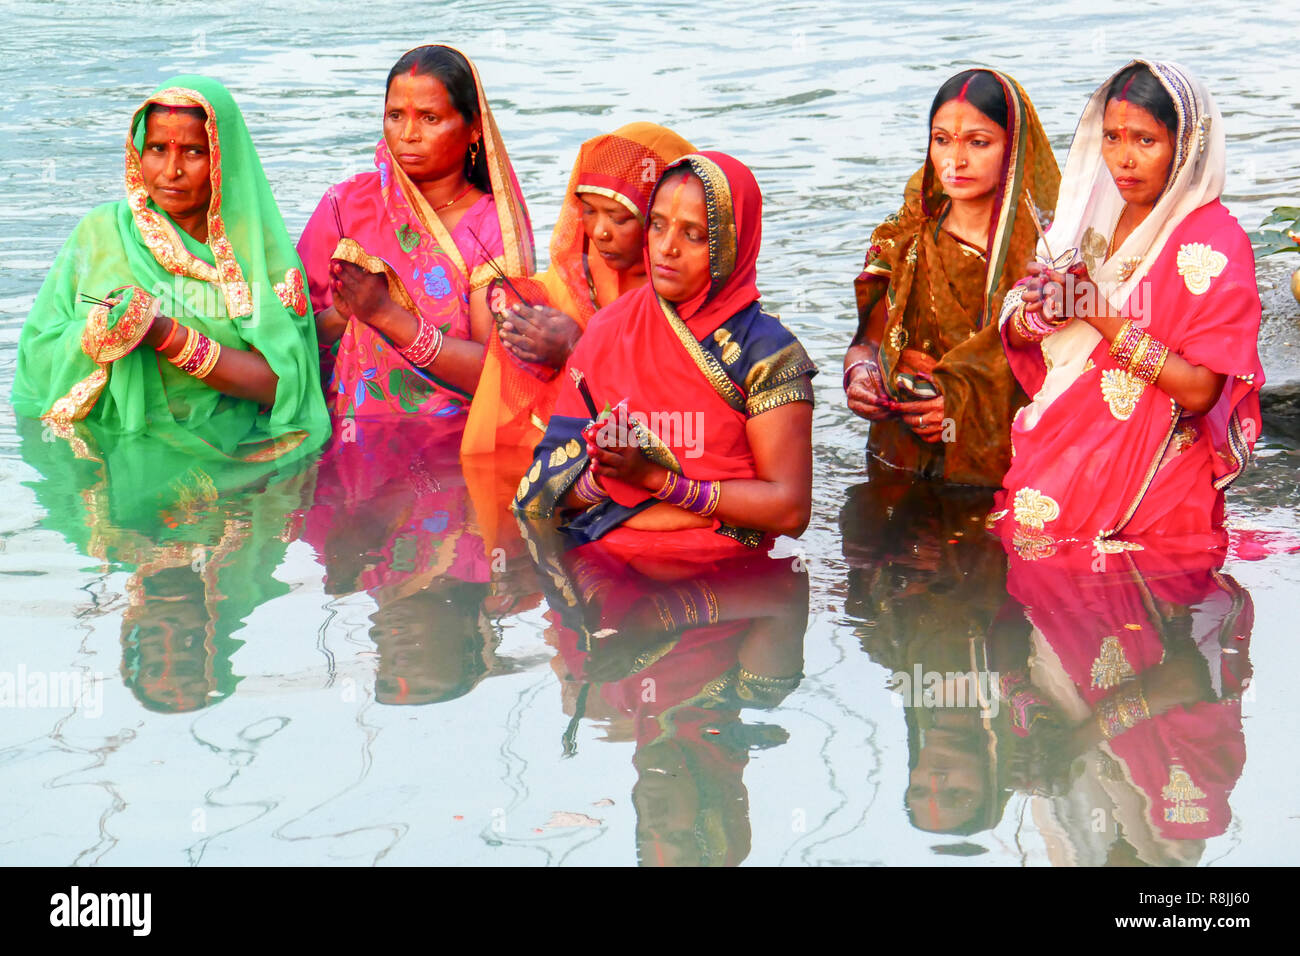 group of women in colourful saris praying in the water of river Ganga at Rishikesh, India Stock Photo